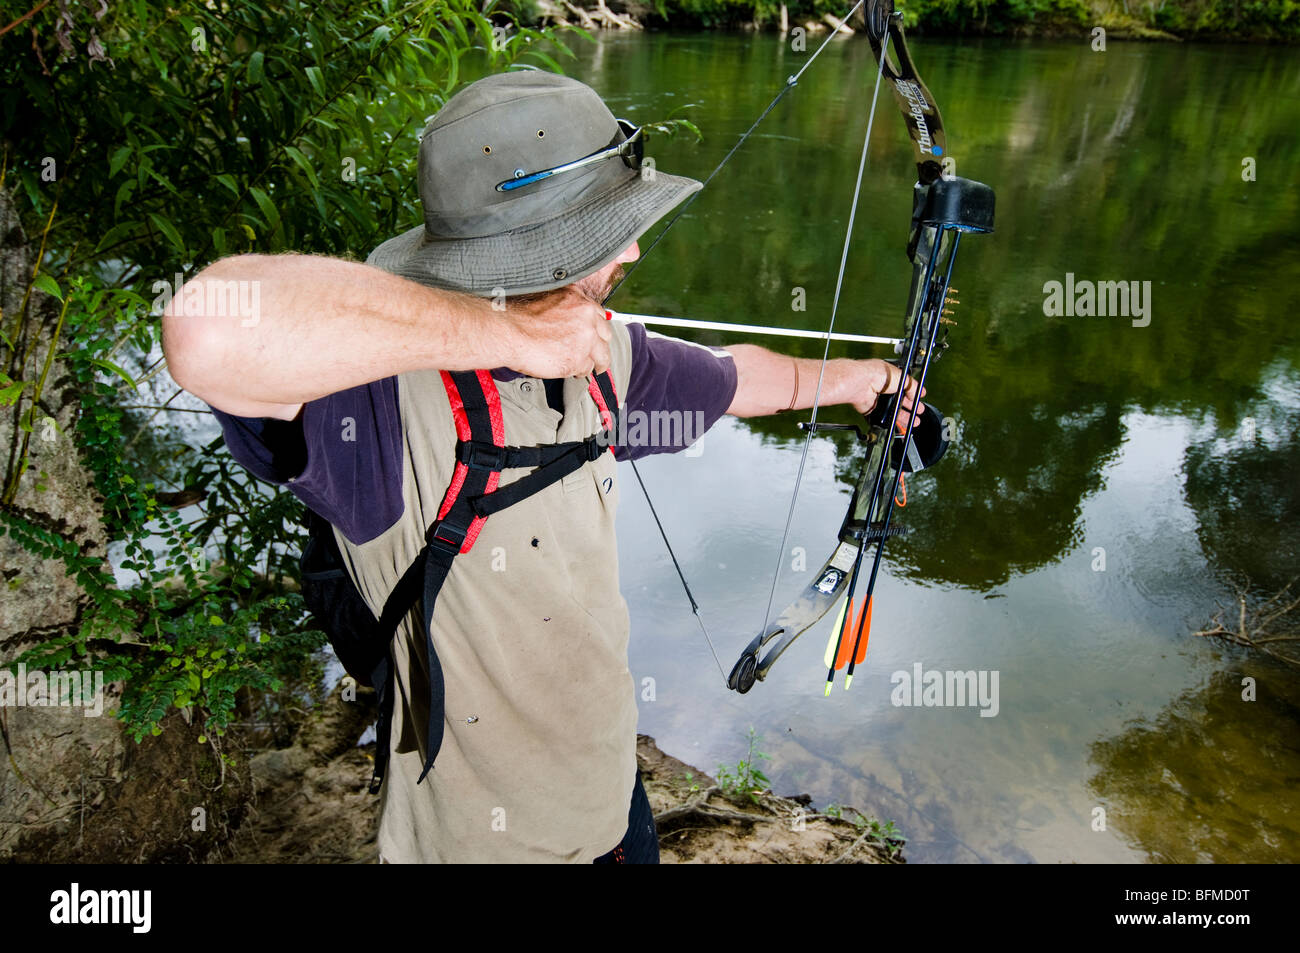 Boy fishing in a lake with a bow and arrow, Lago Miwa, as